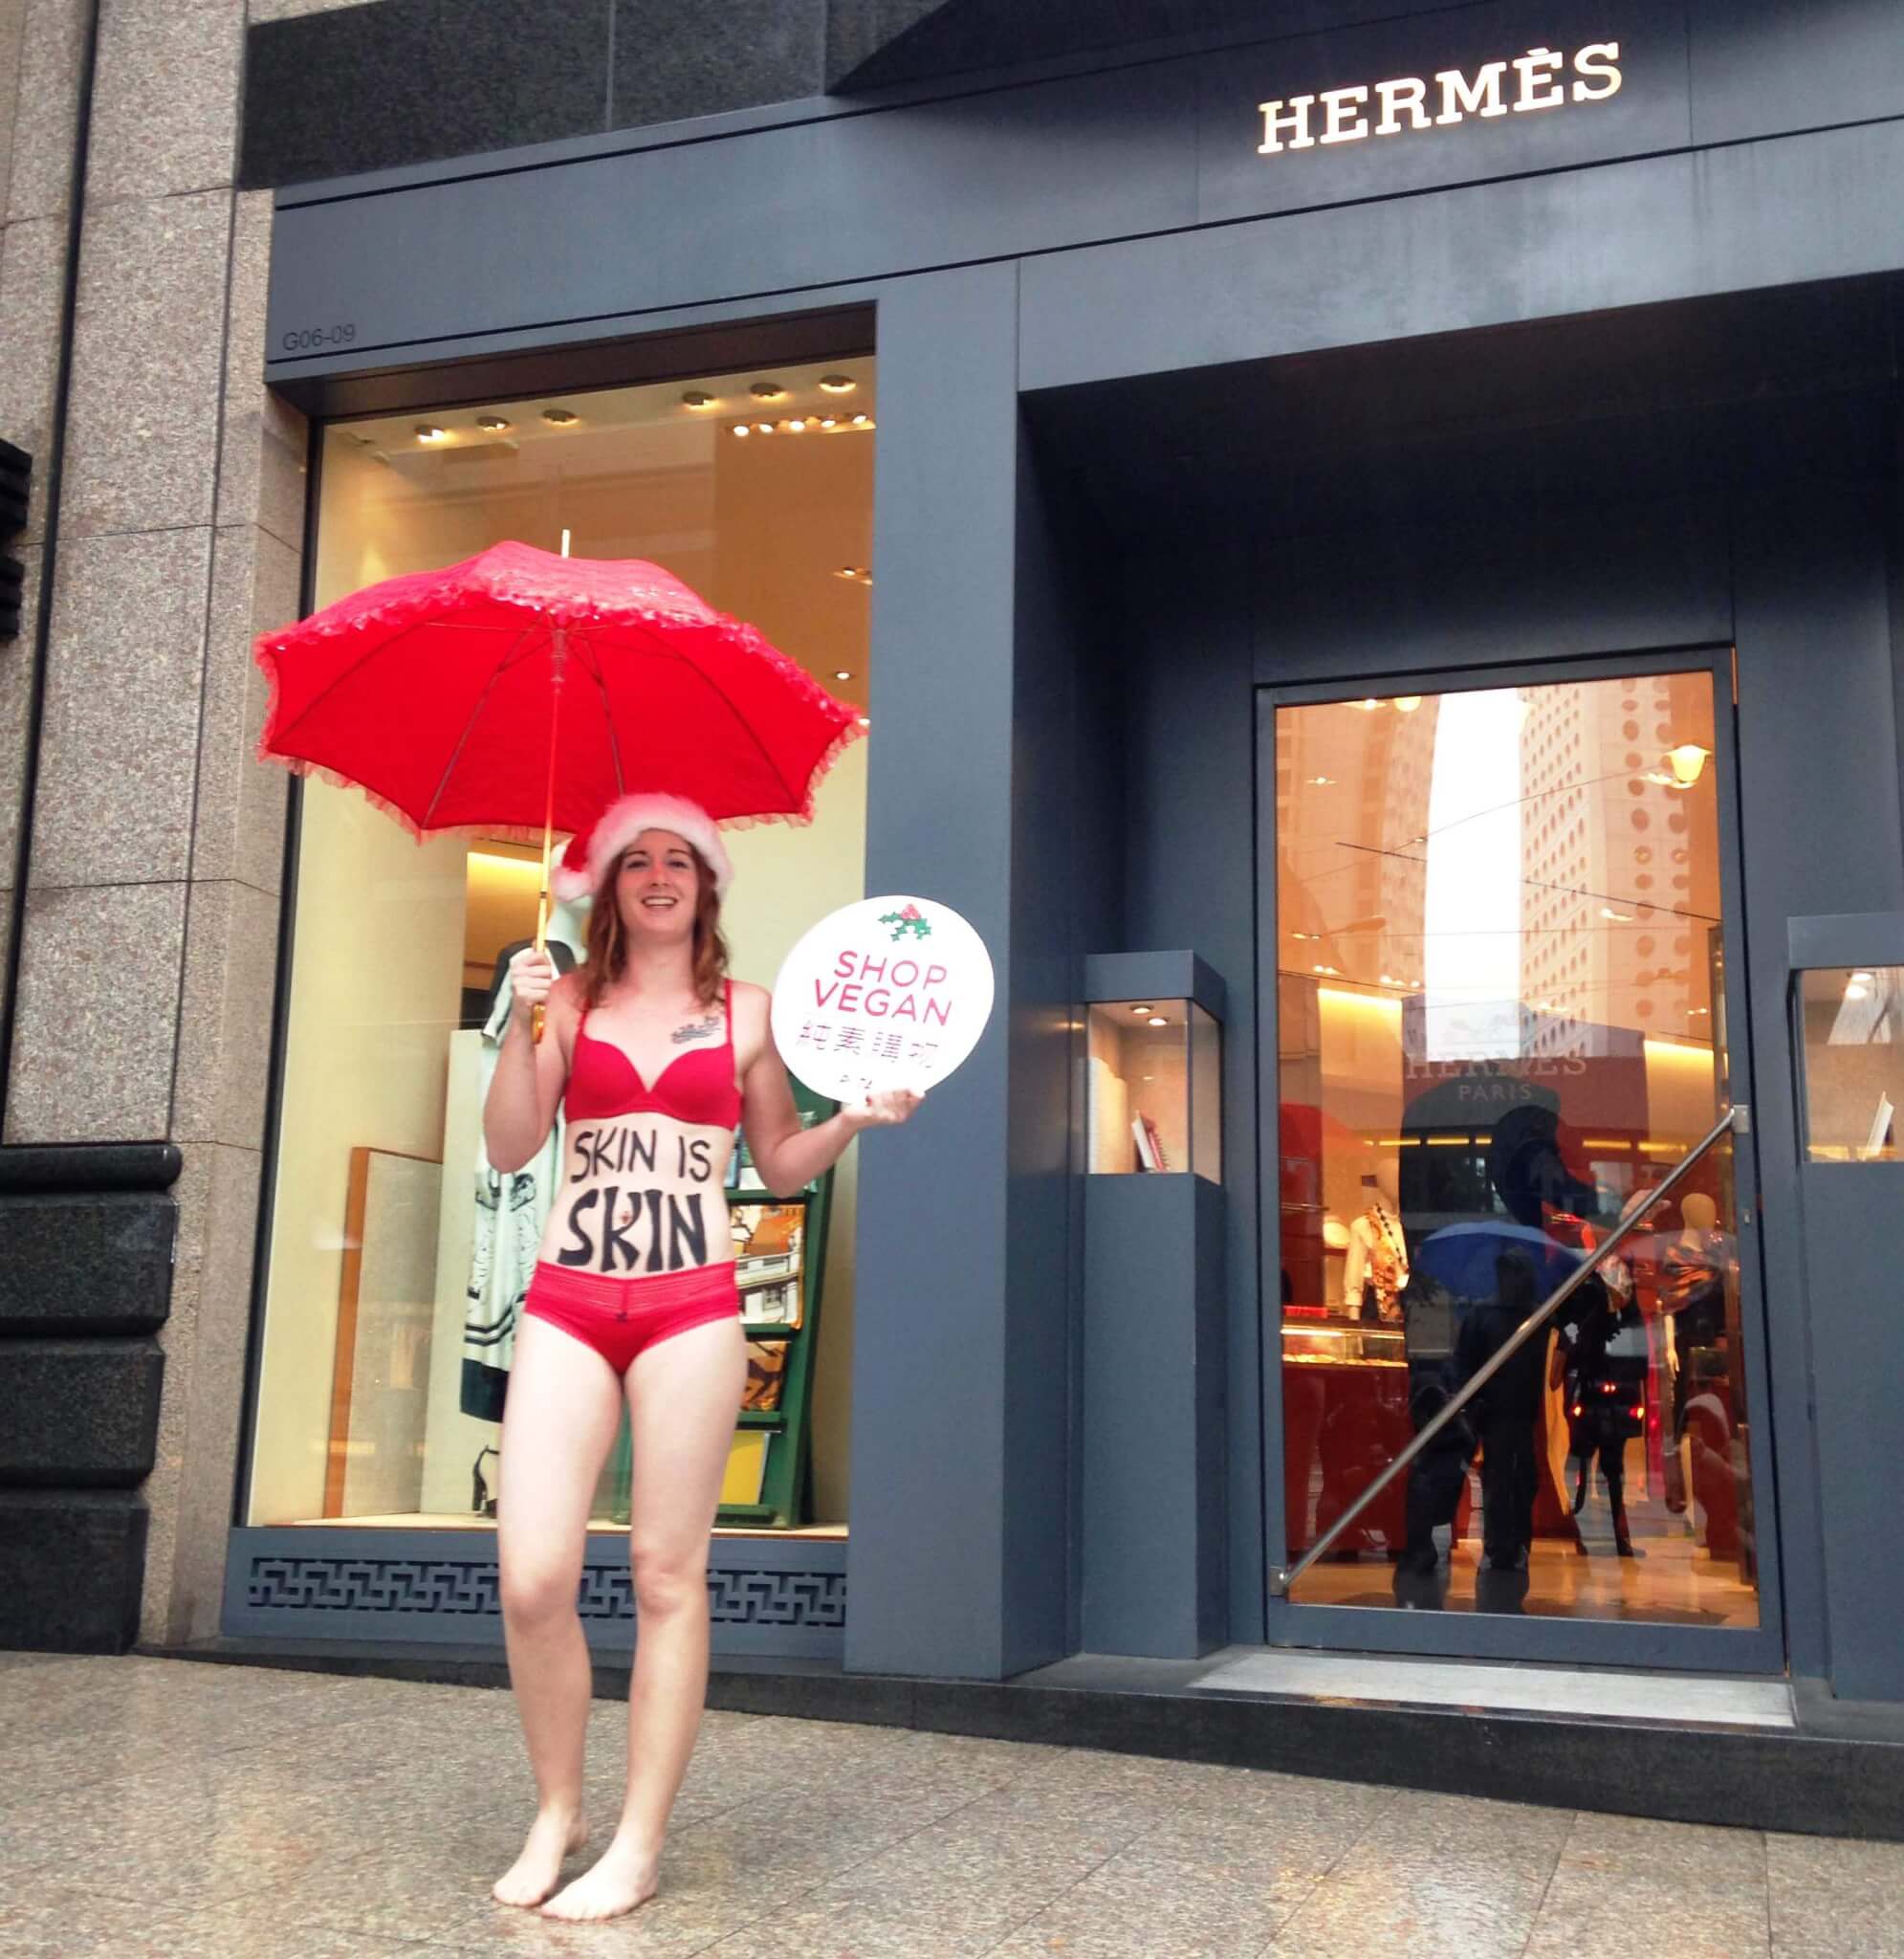 Activist in Sexy Ho-ho-holiday Outfit with “Skin is Skin” Message